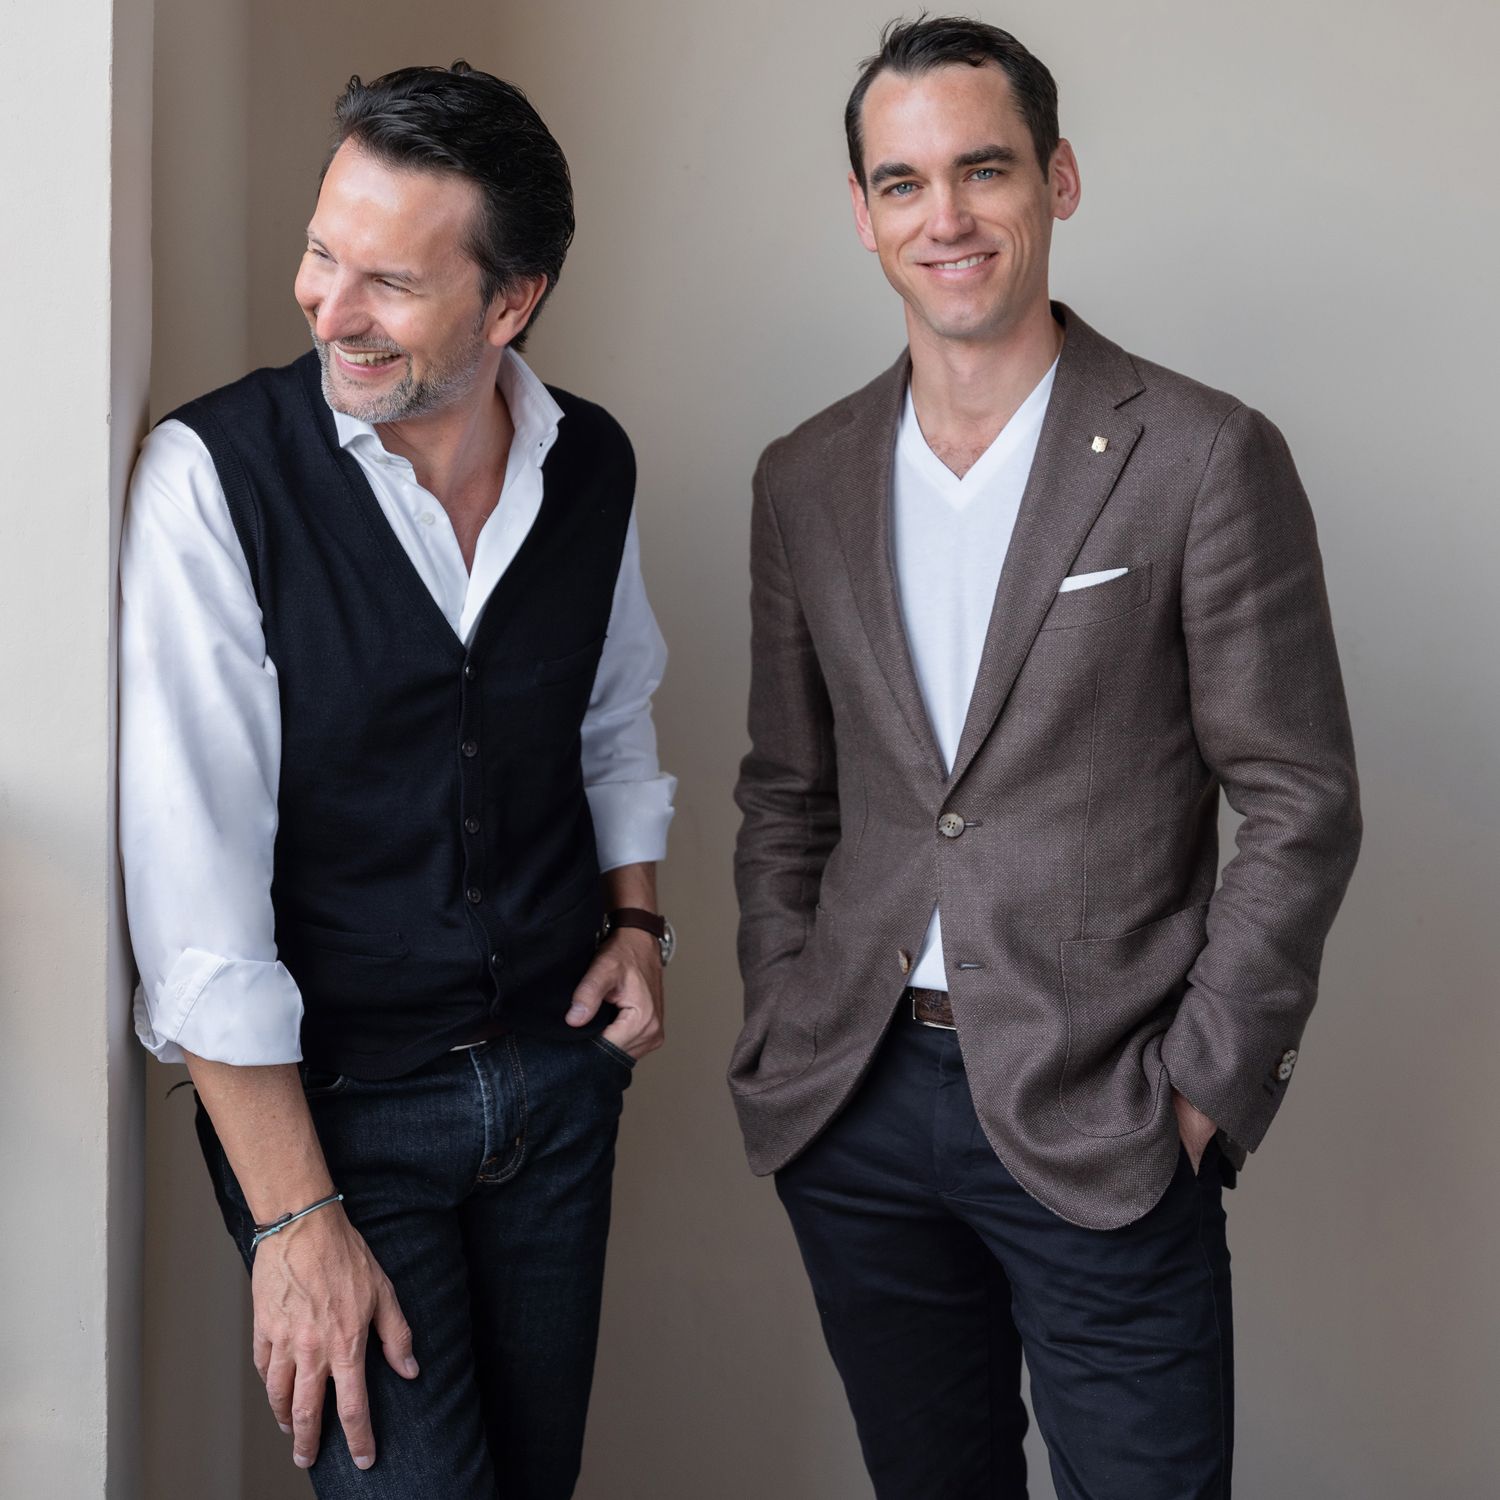 Max Büsser founder of MB&F and Edouard Meylan, CEO of H. Moser & Cie., both found their individual independent brands 15 years ago; long time friends and now finally collaborators